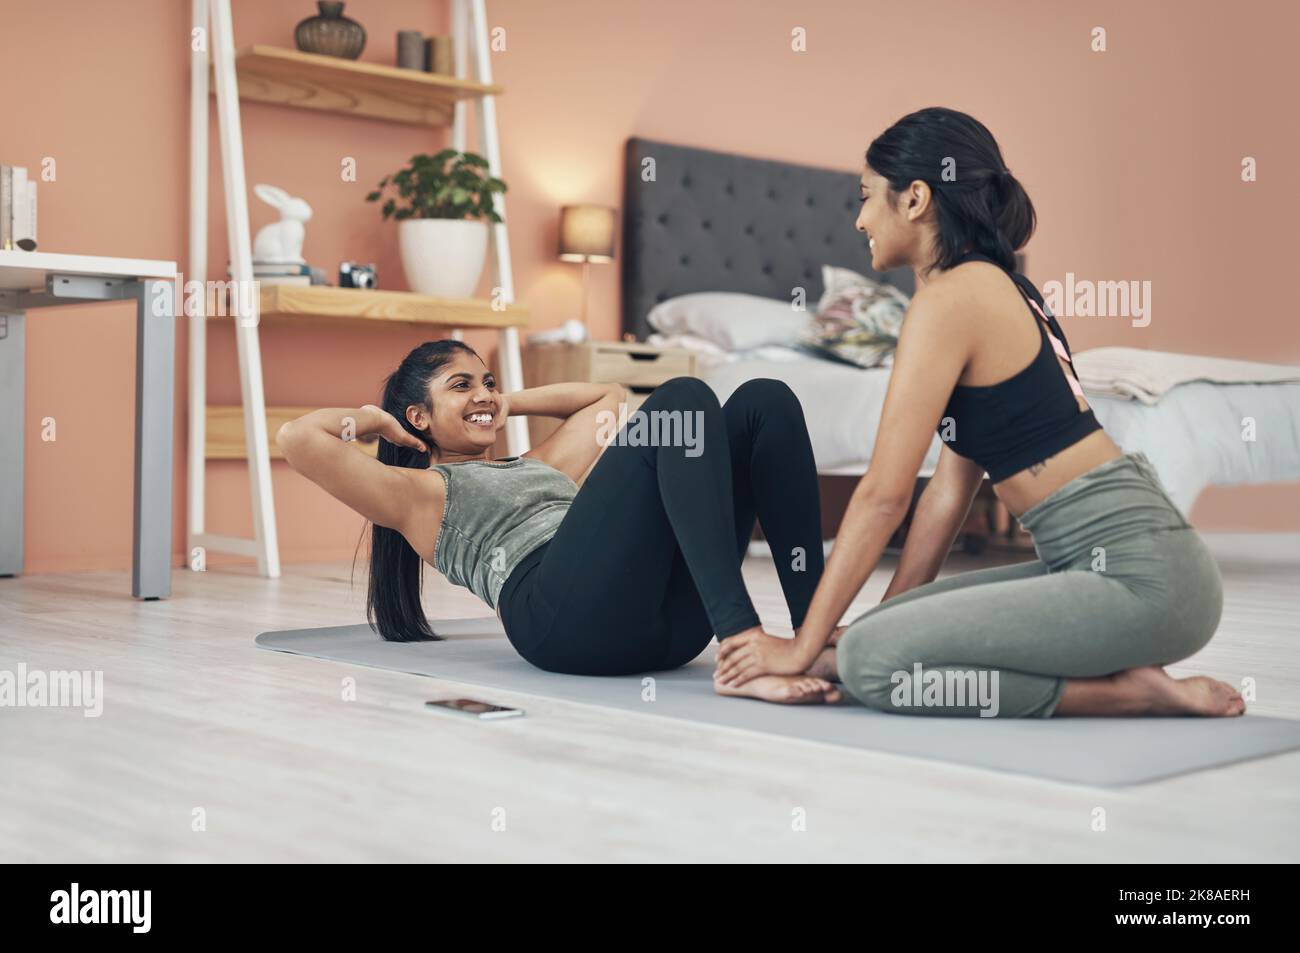 My sister is my biggest supporter. two beautiful young women exercising together at home. Stock Photo